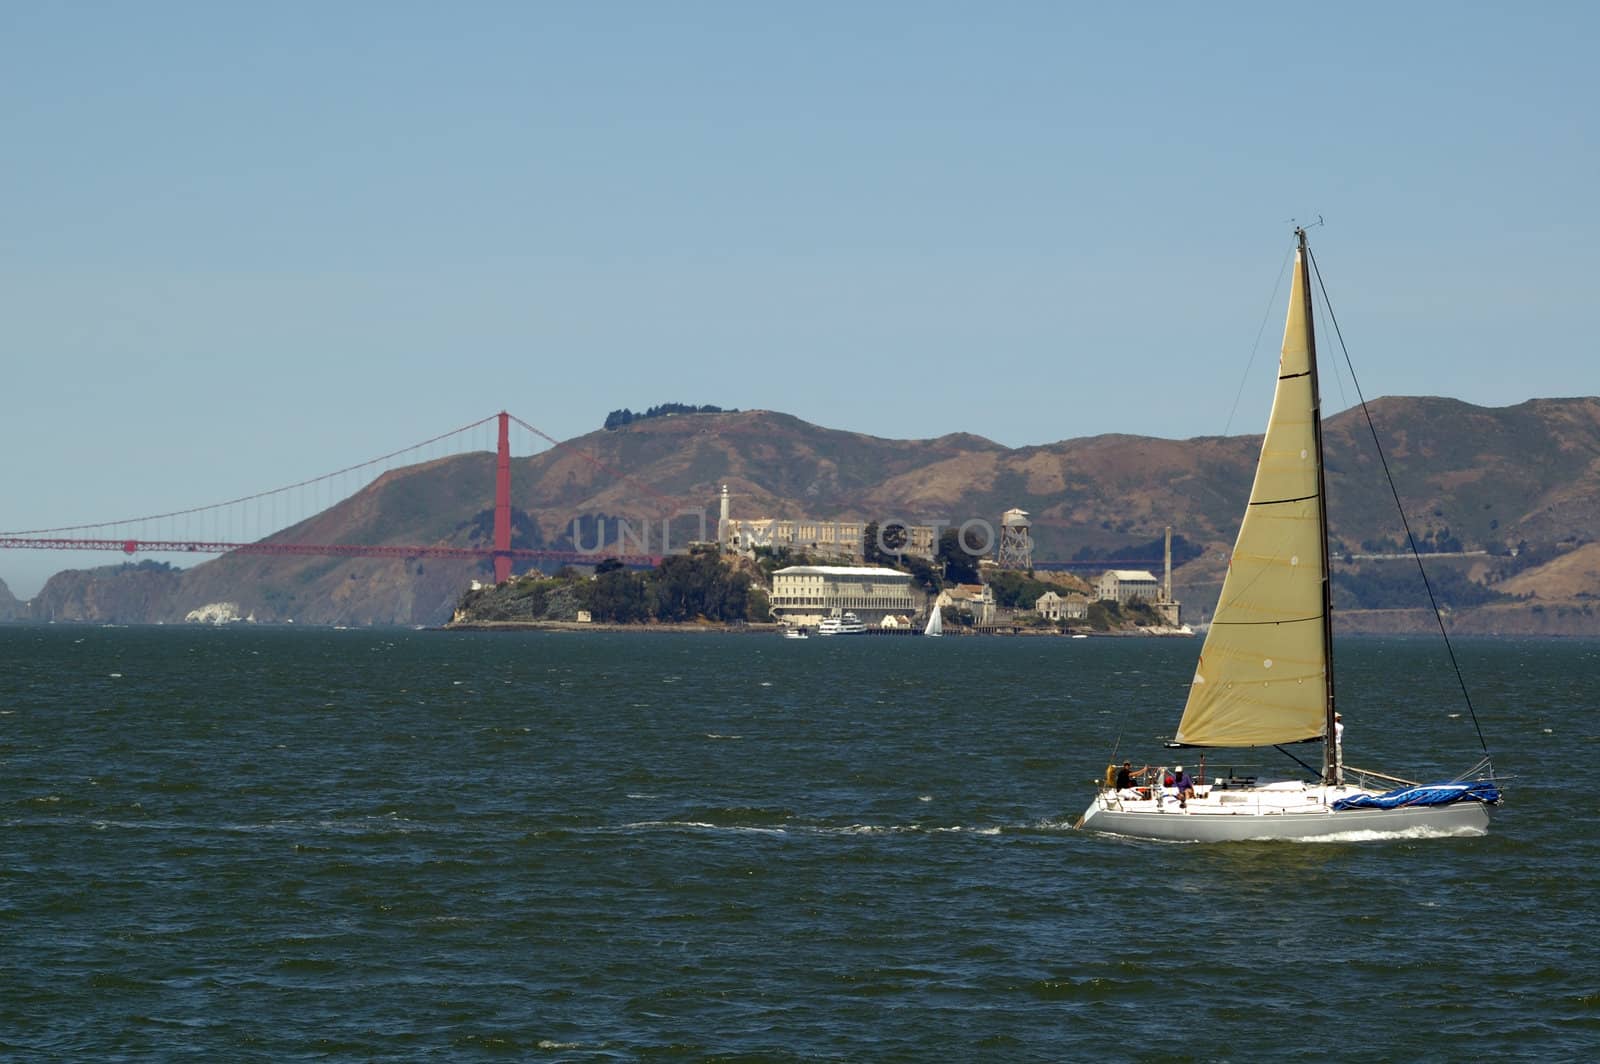 Sailing on the Bay by jeffbanke